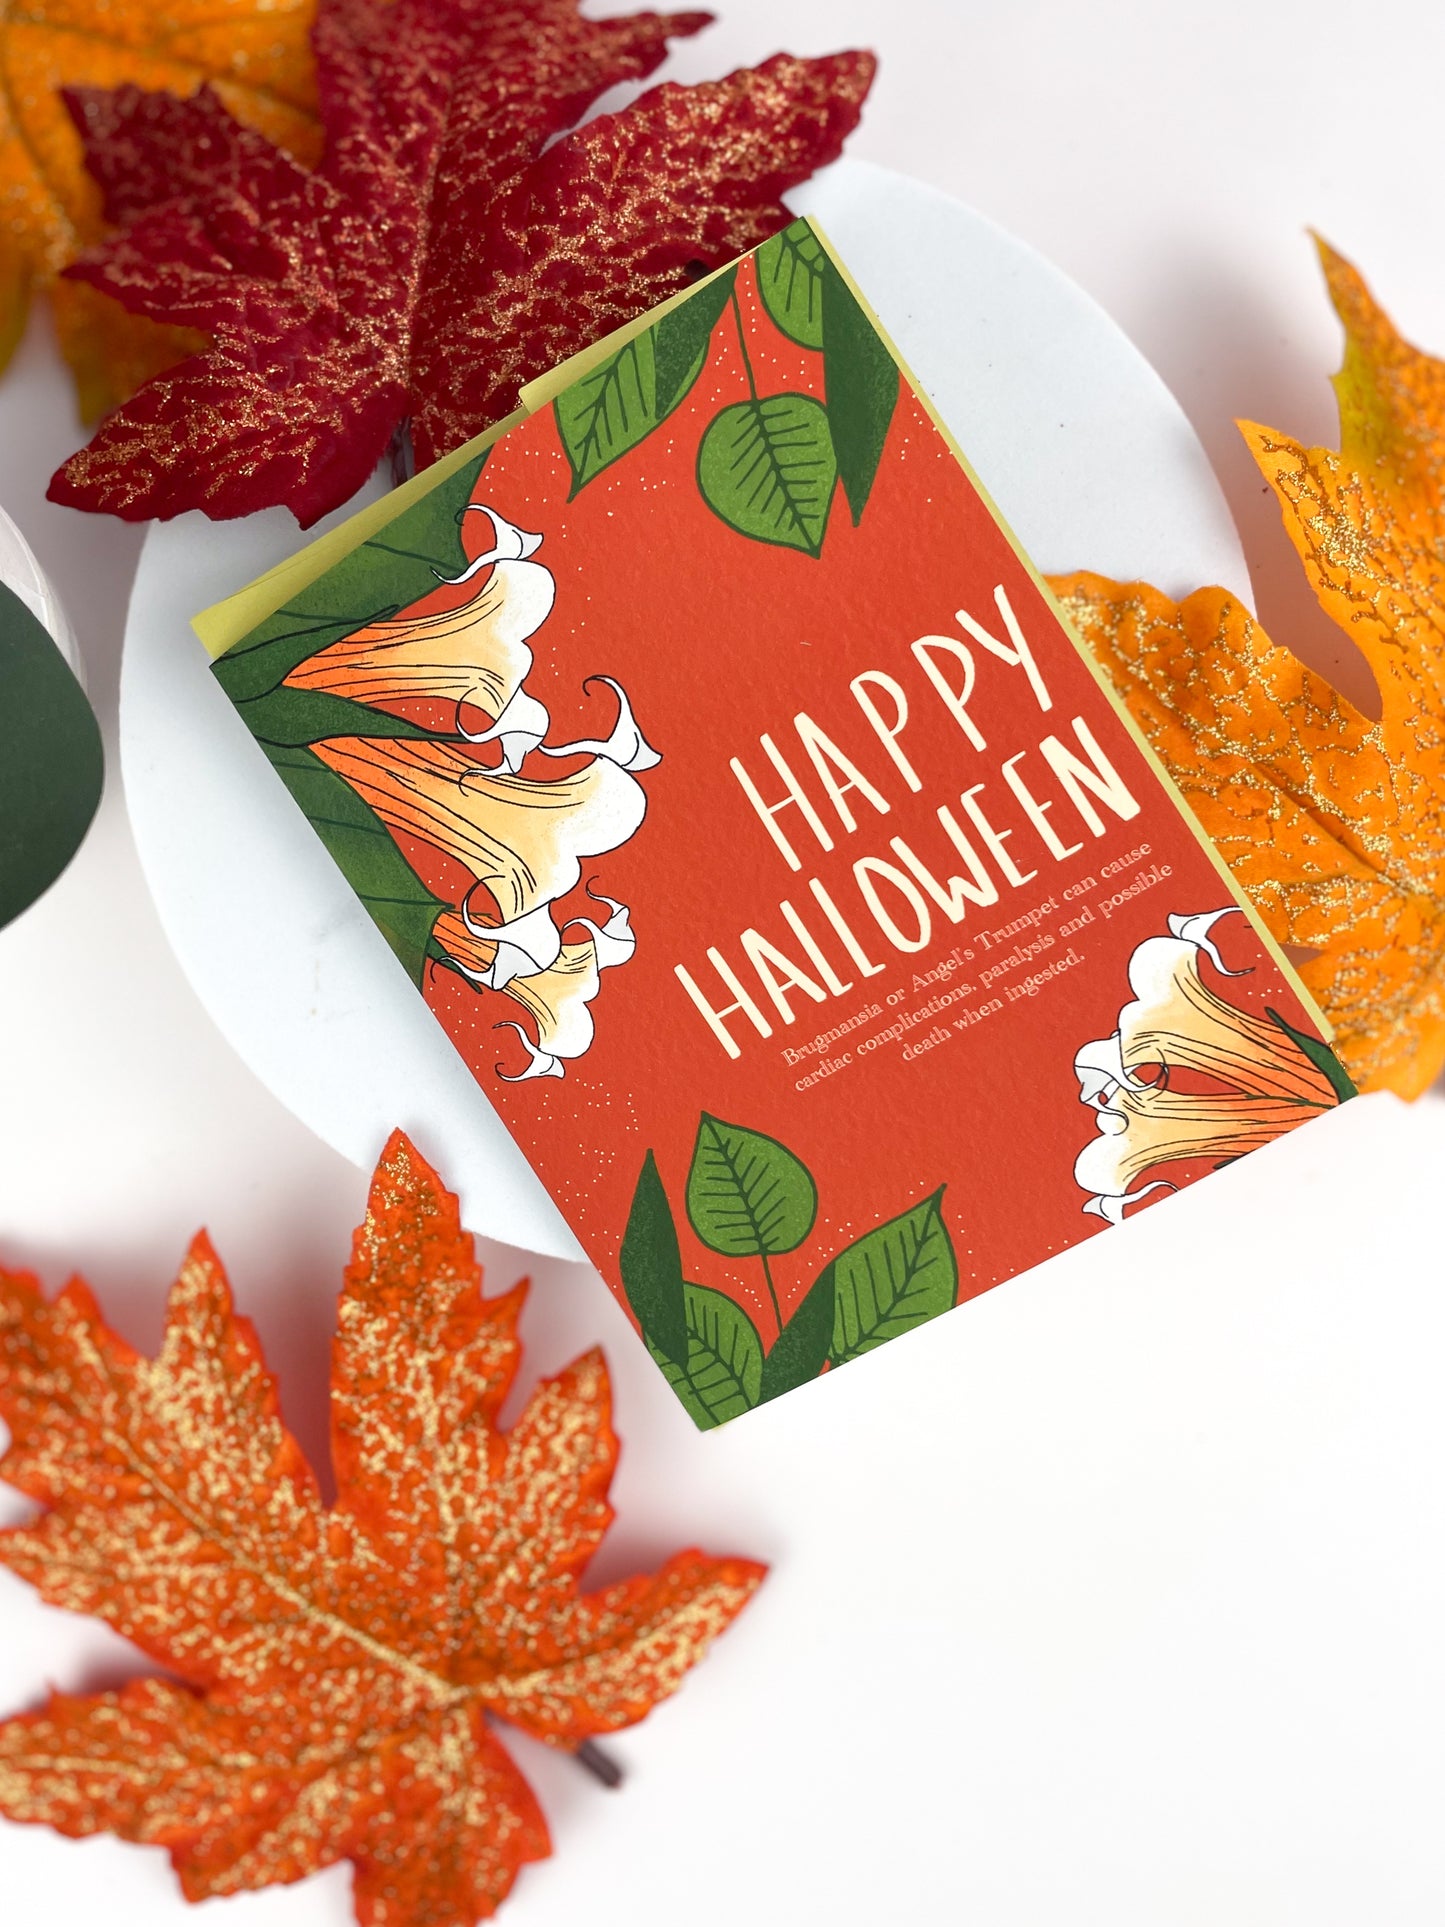 Happy Halloween Greeting Card with Angel's Trumpet